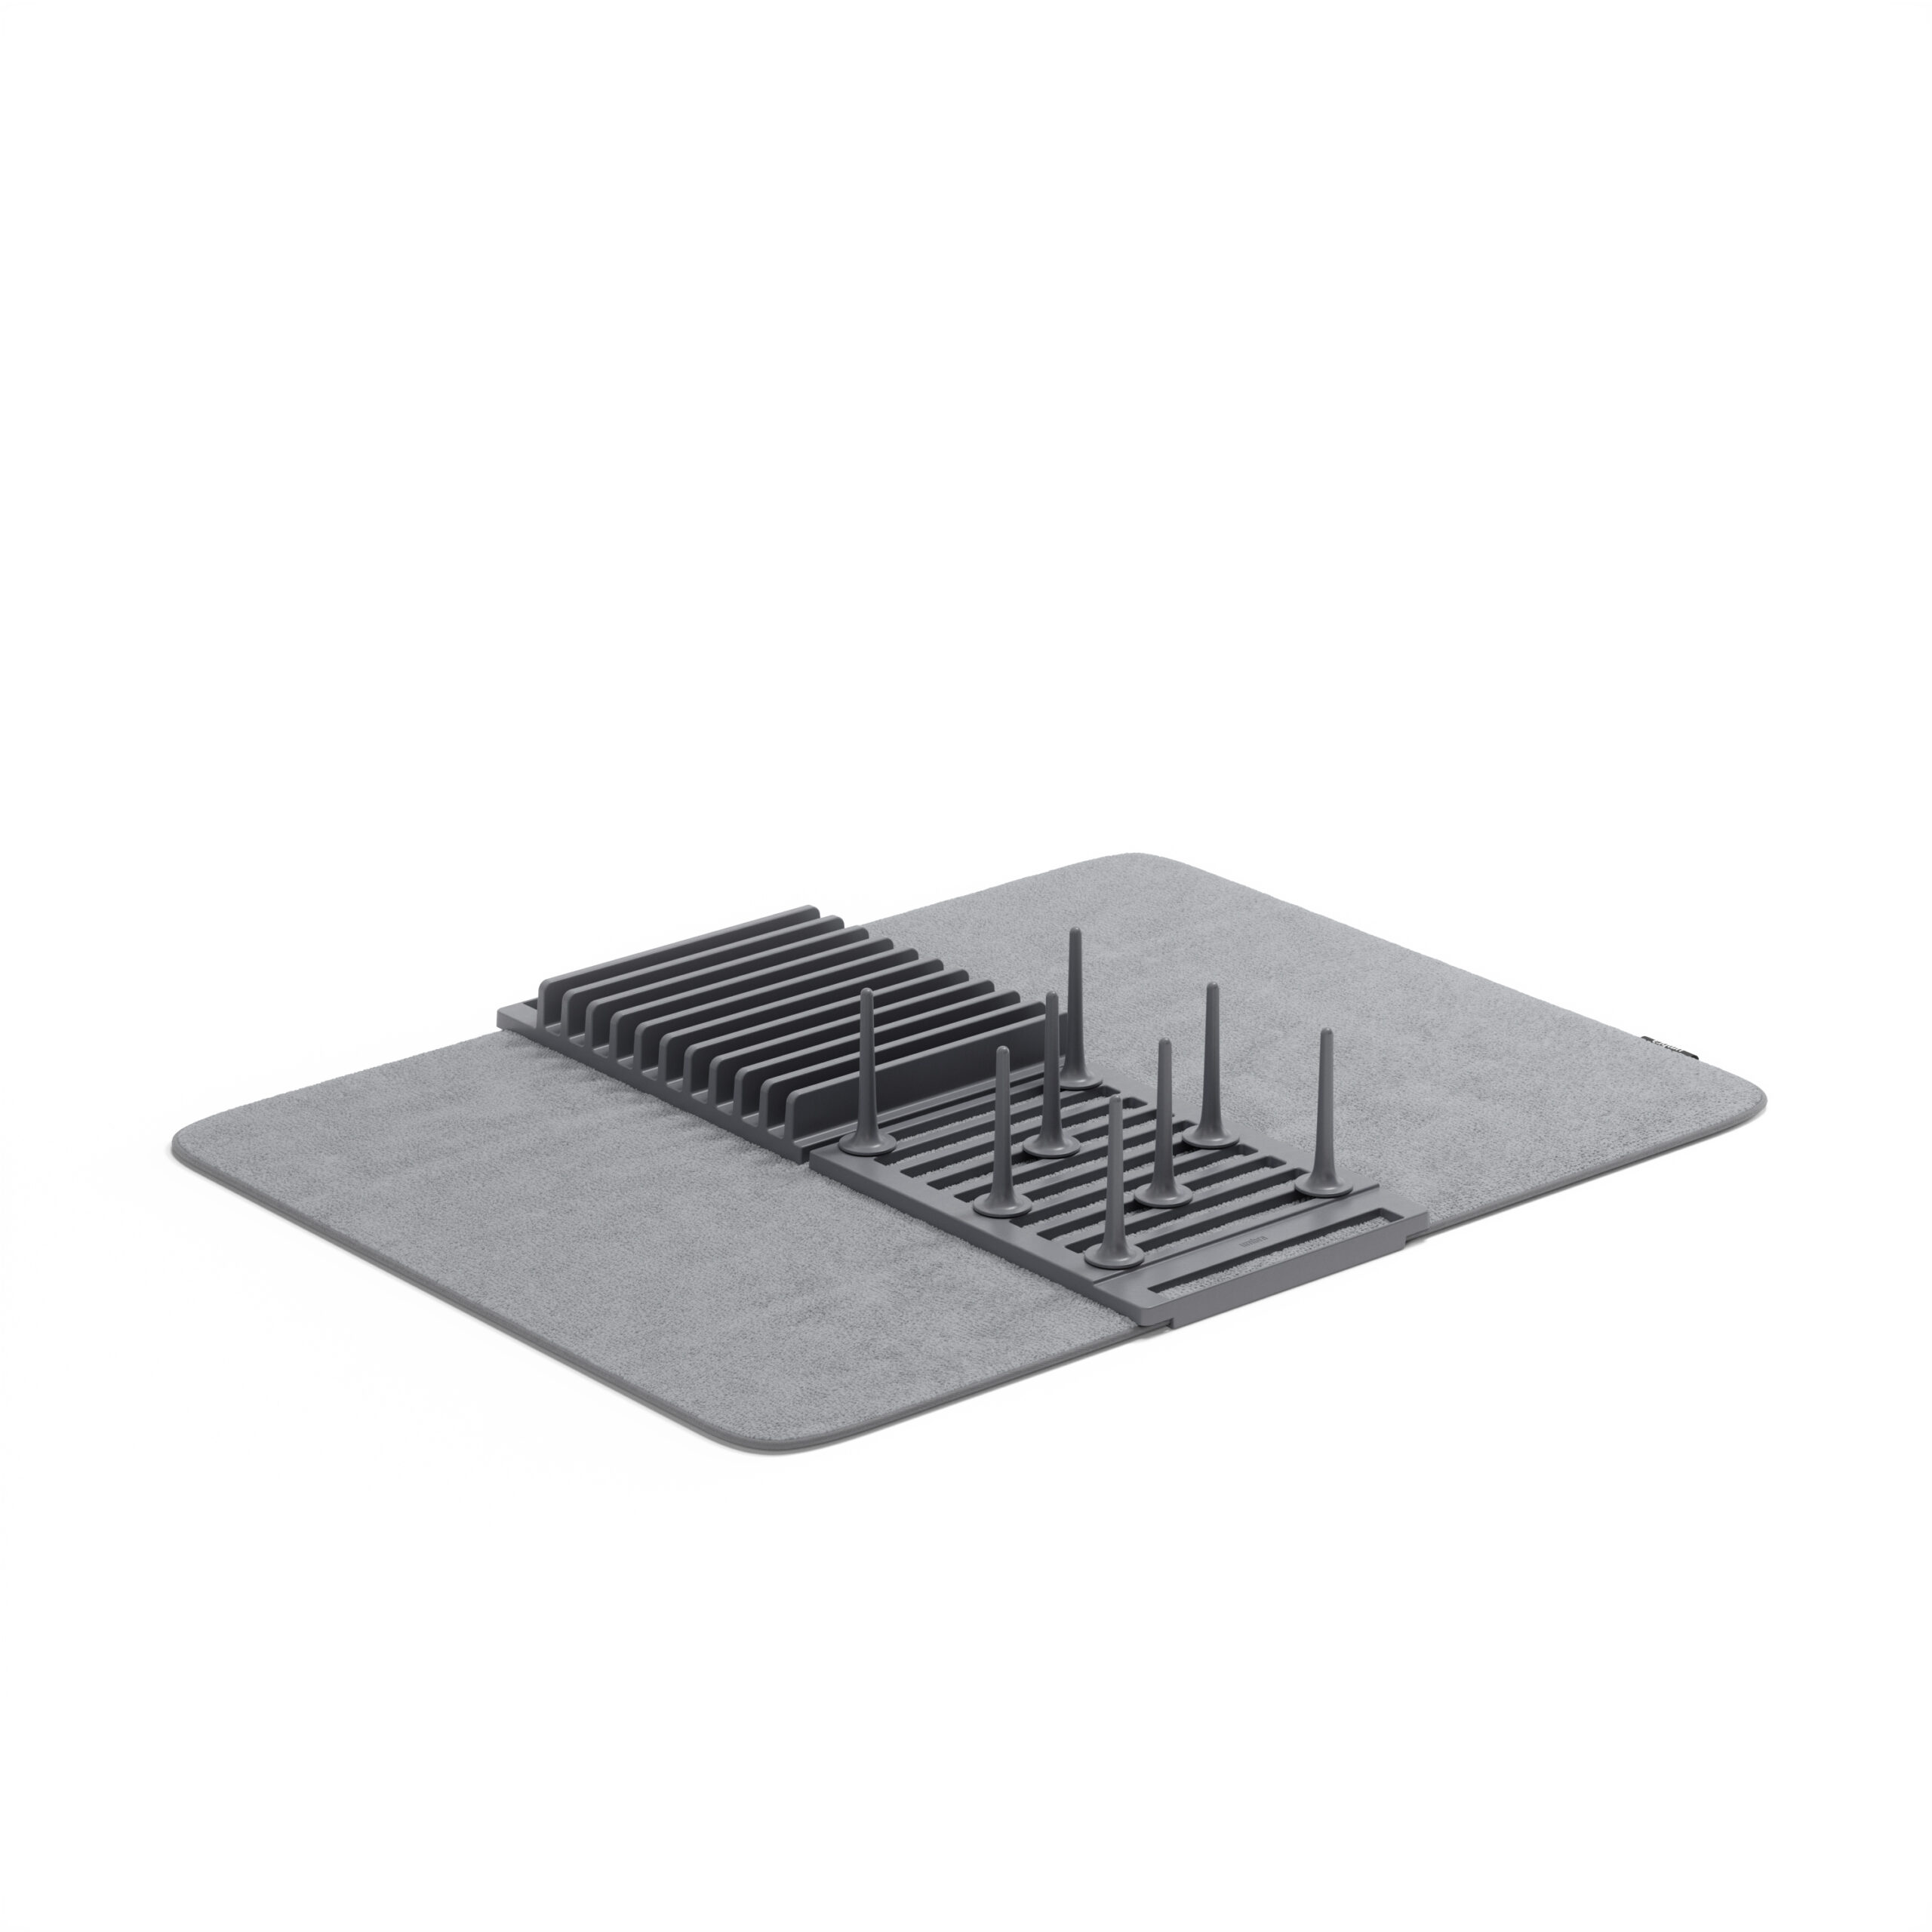 Umbra Udry Peg Drying Rack with Mat Charcoal